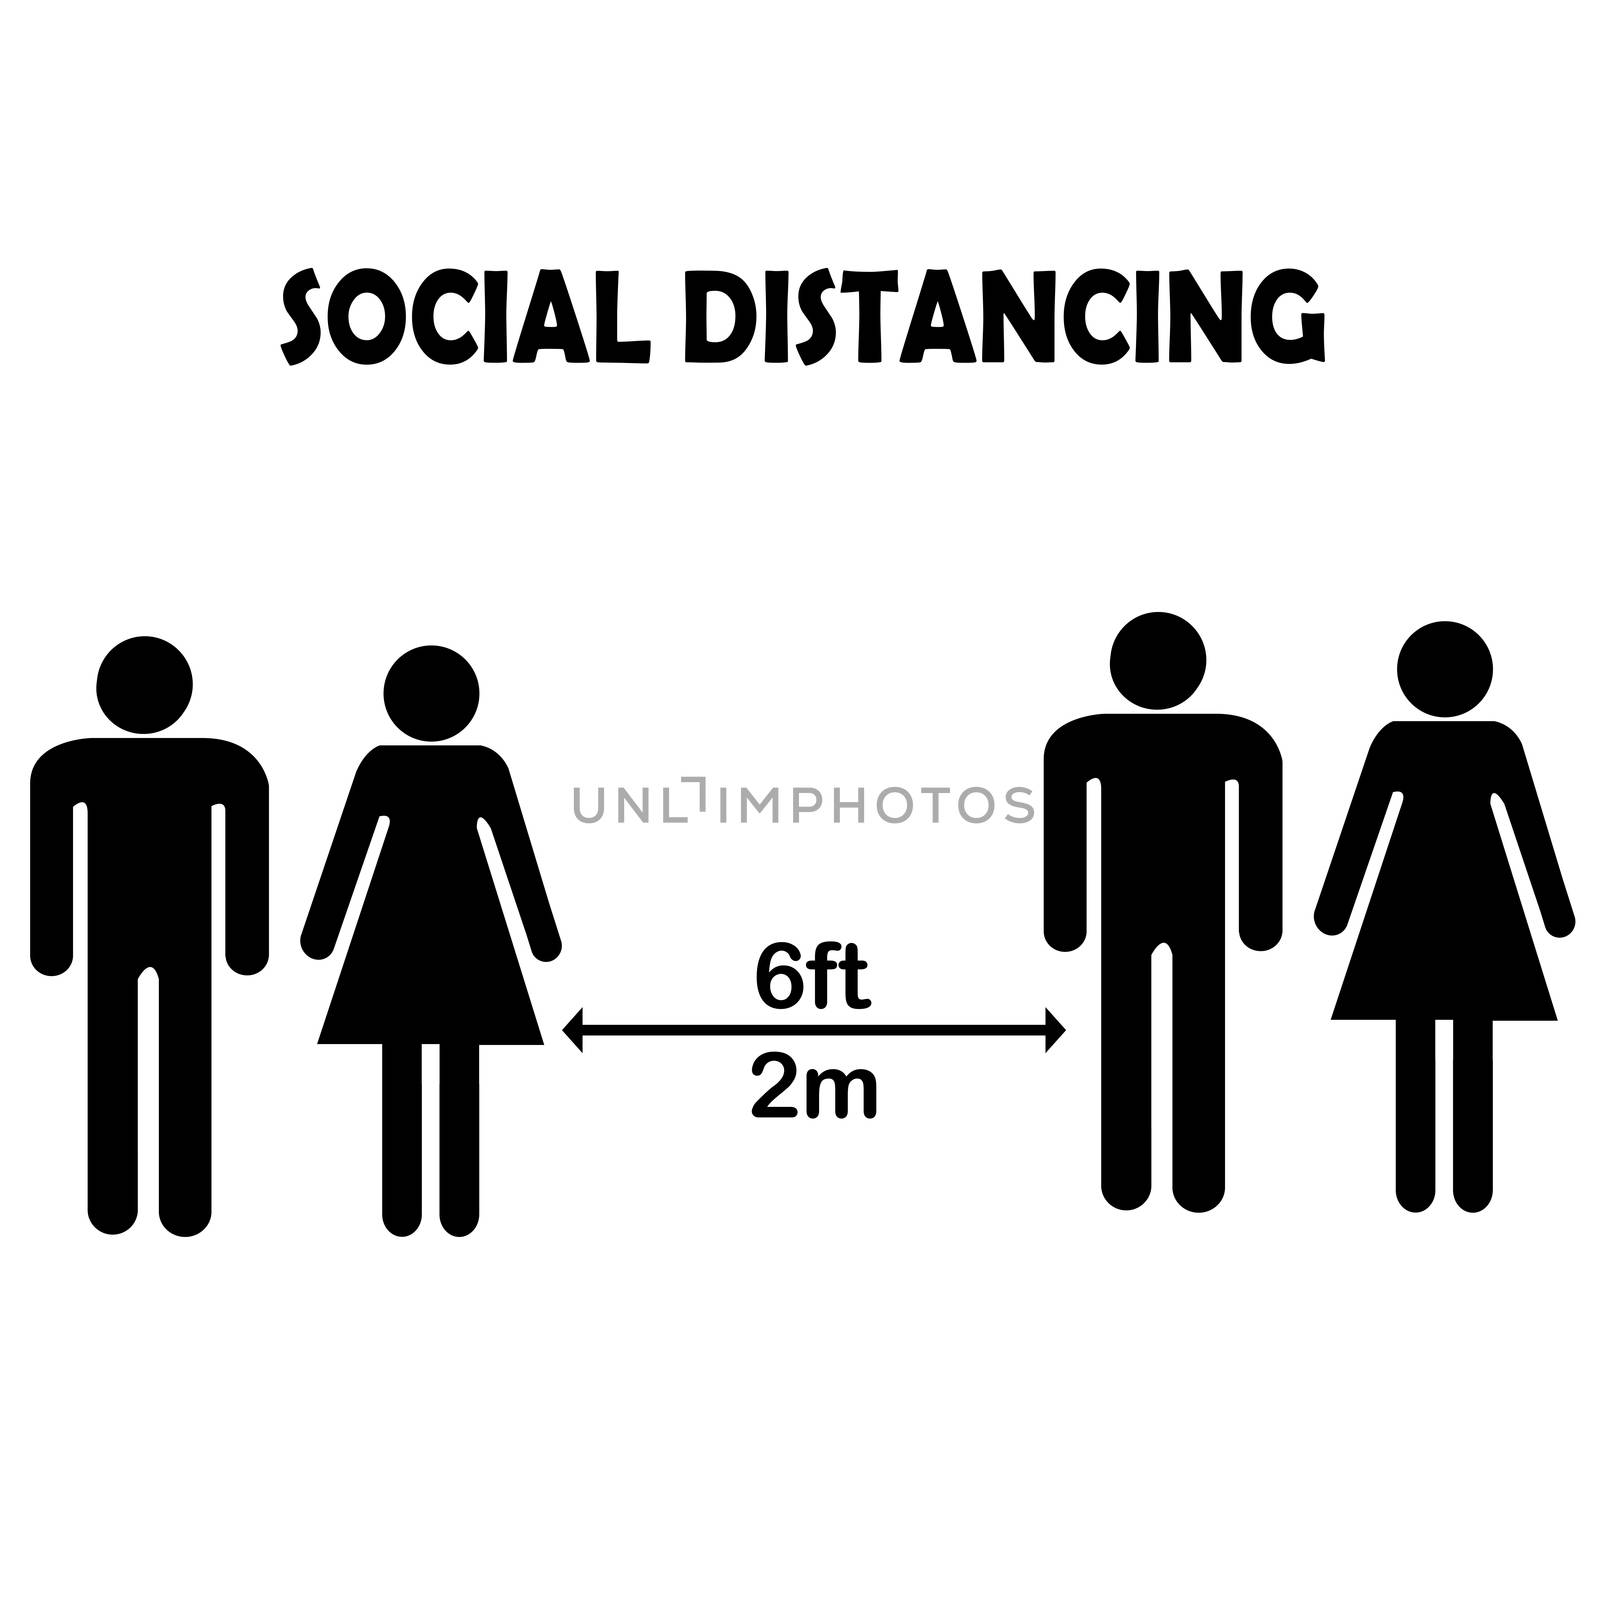 Social distancing concept with family pictograms by hibrida13